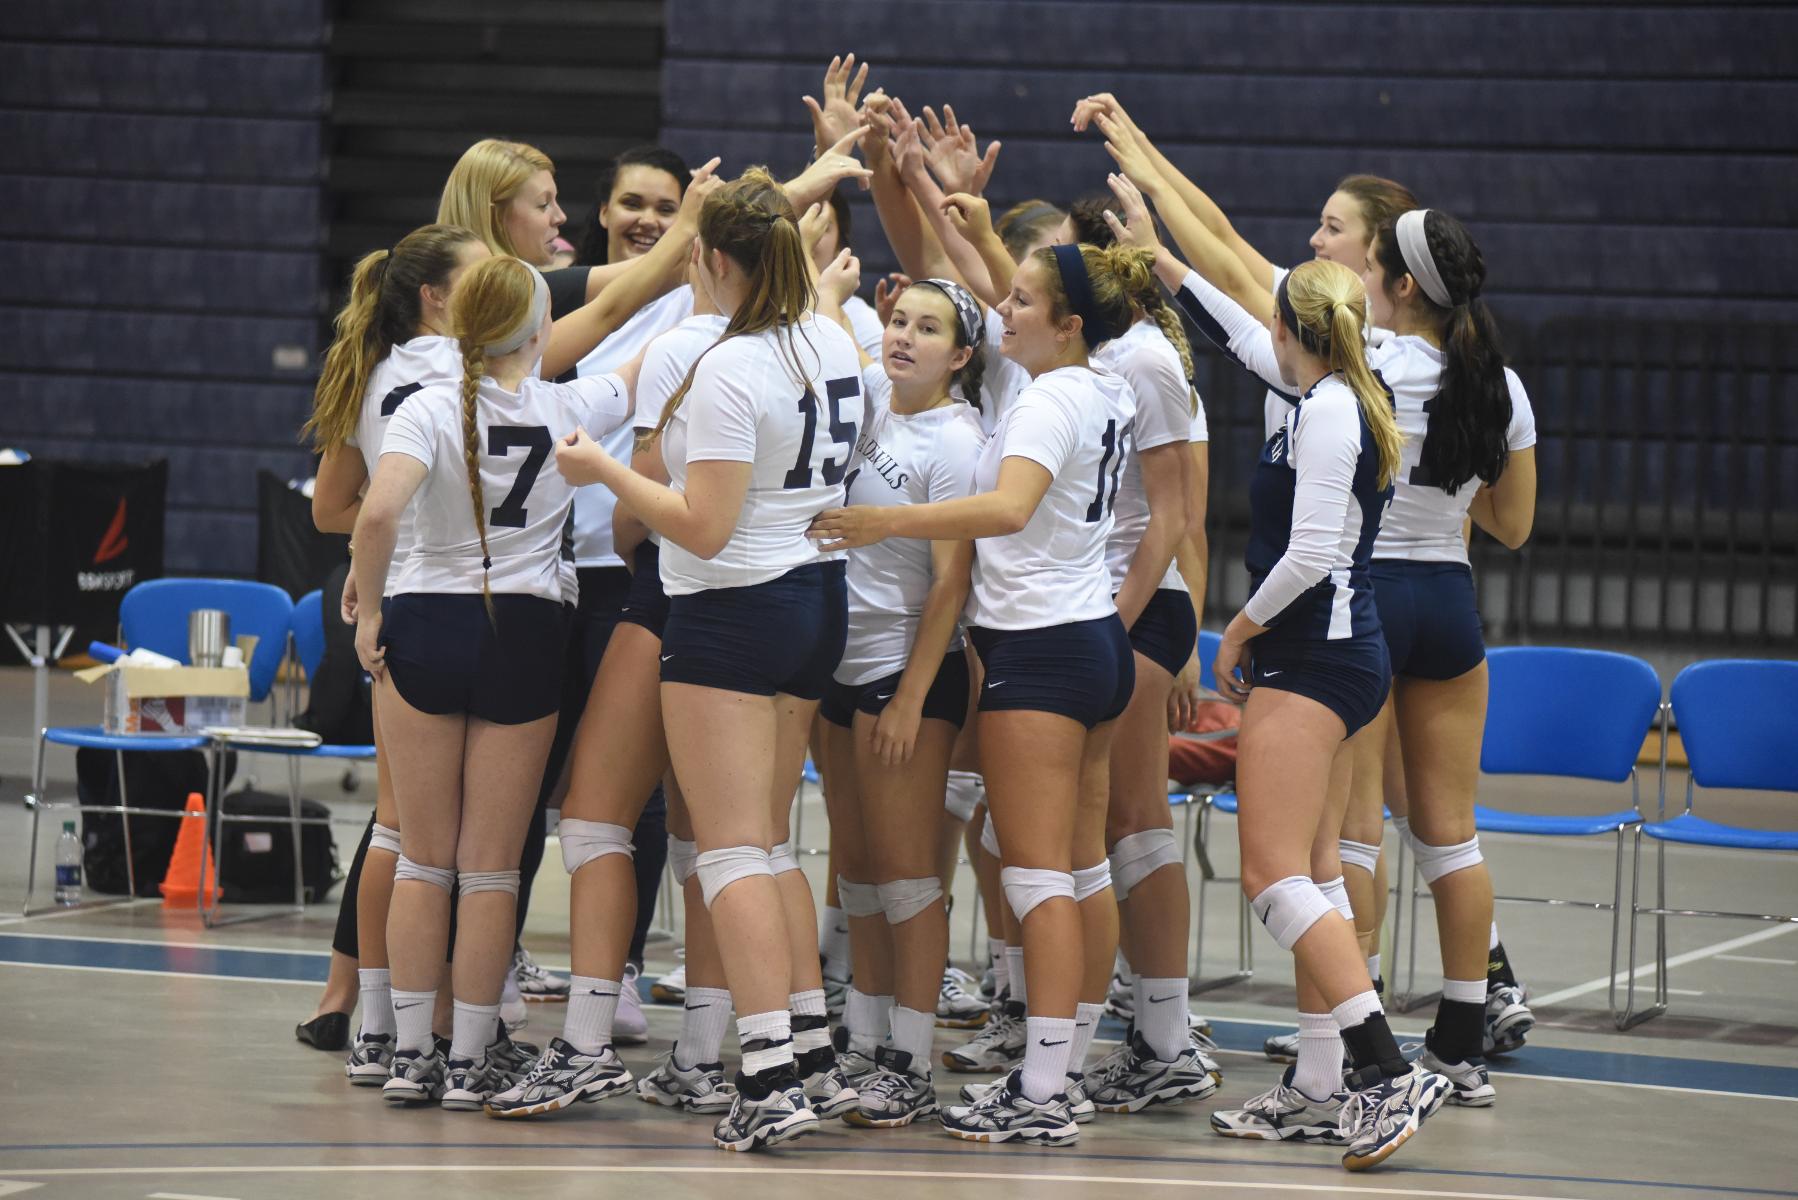 Women's Volleyball Moves on in NJCAA Region 10 Tournament